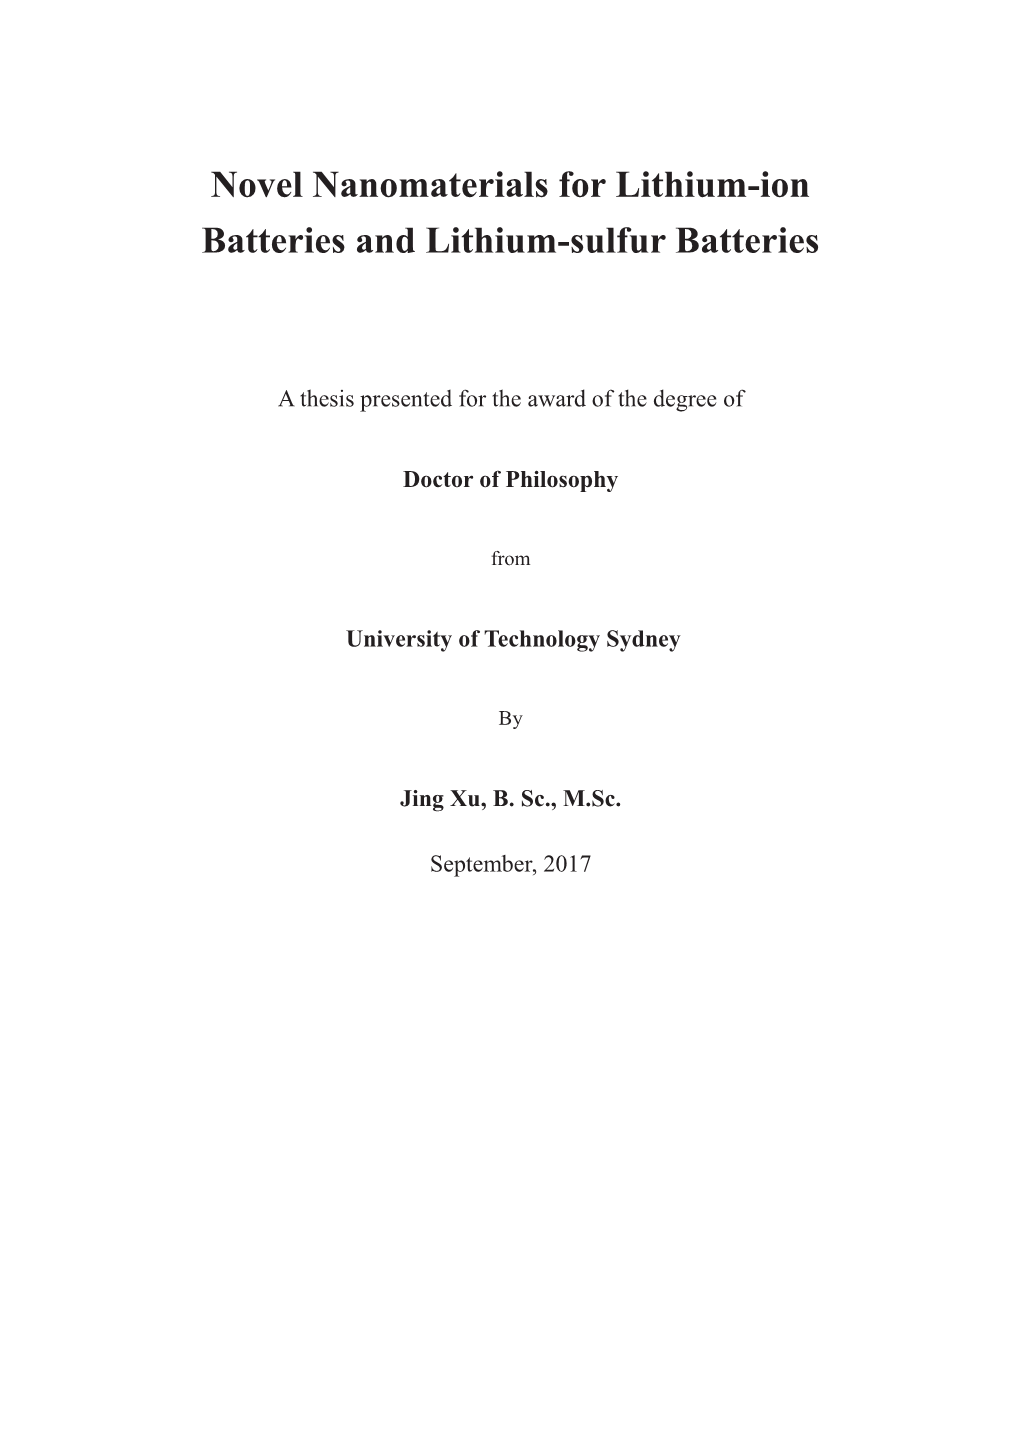 Novel Nanomaterials for Lithium-Ion Batteries and Lithium-Sulfur Batteries